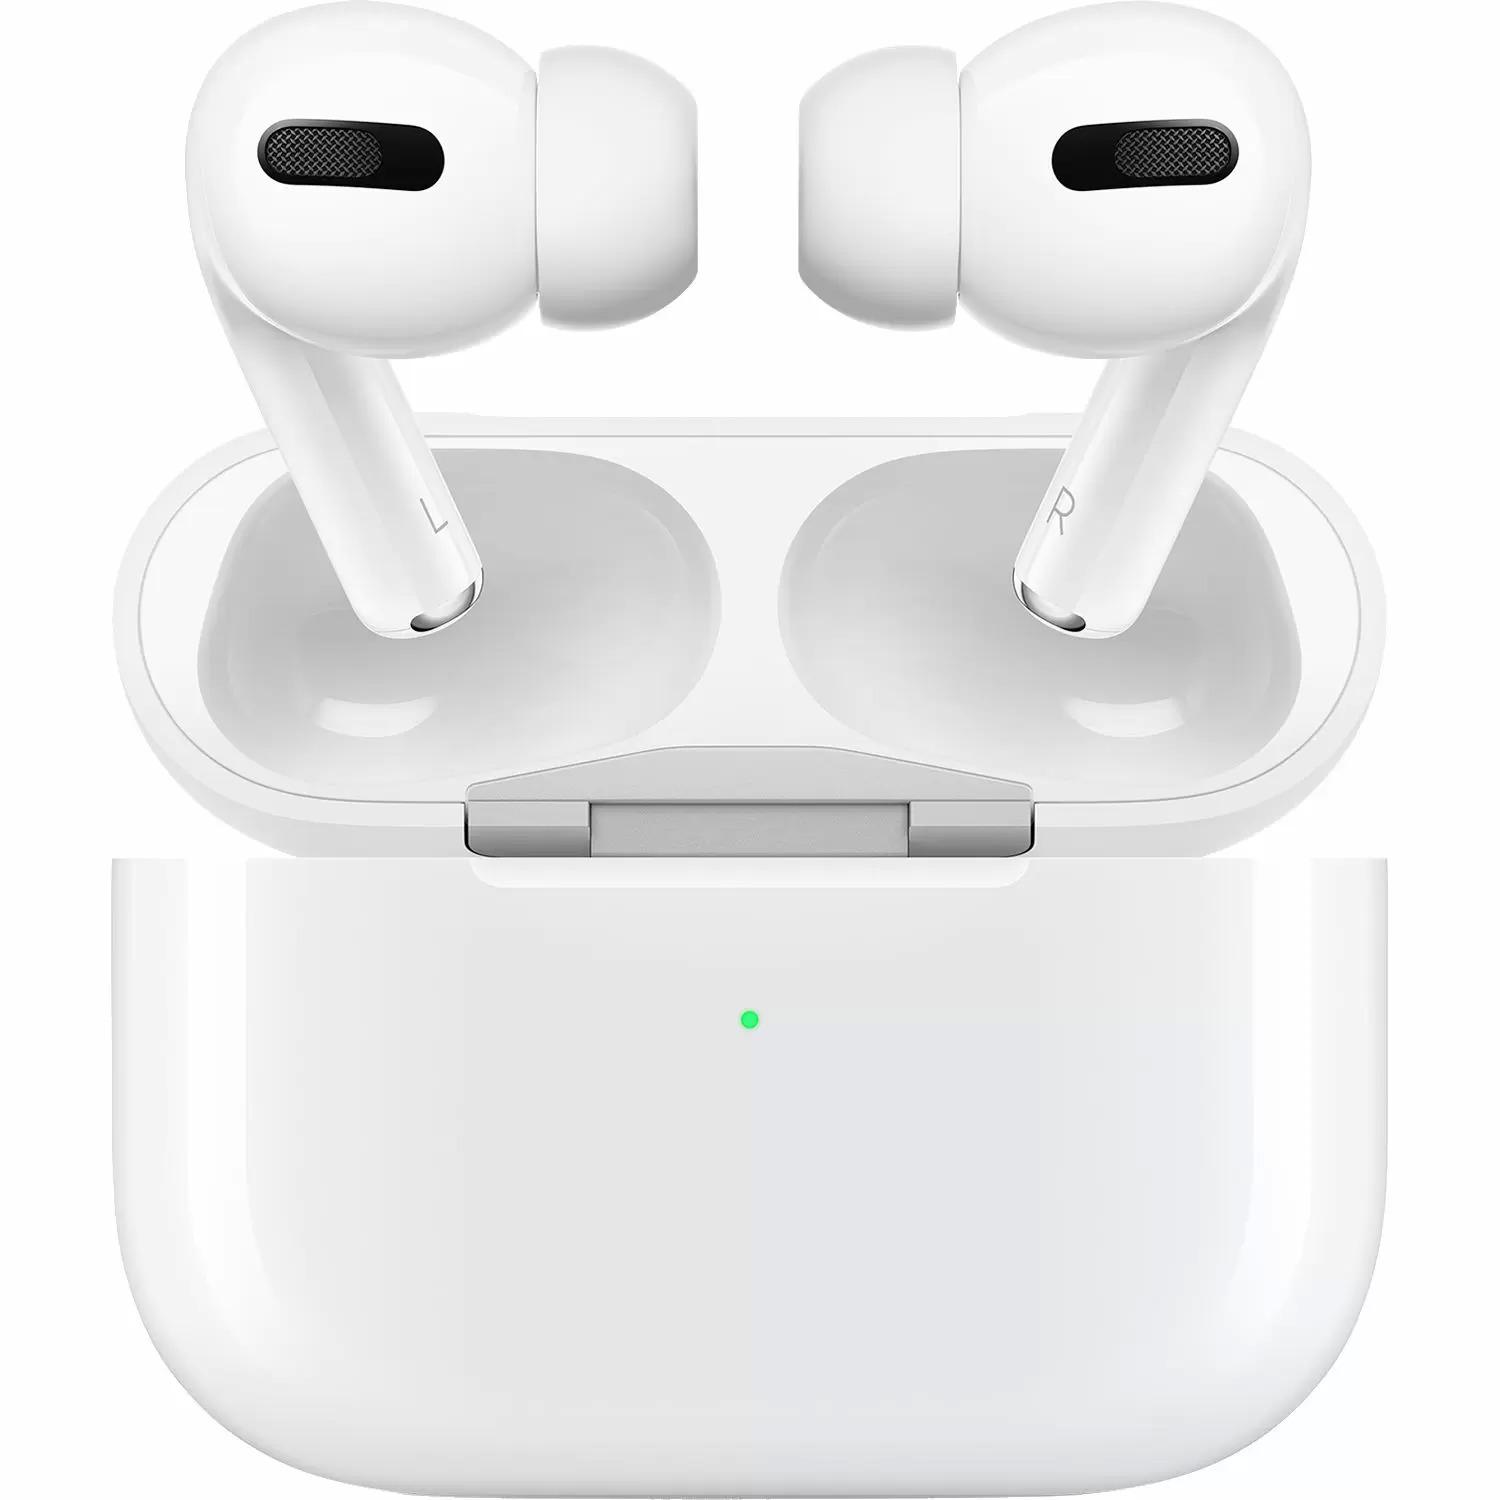 Apple AirPods Pro 1st Gen Refurbished for $119.99